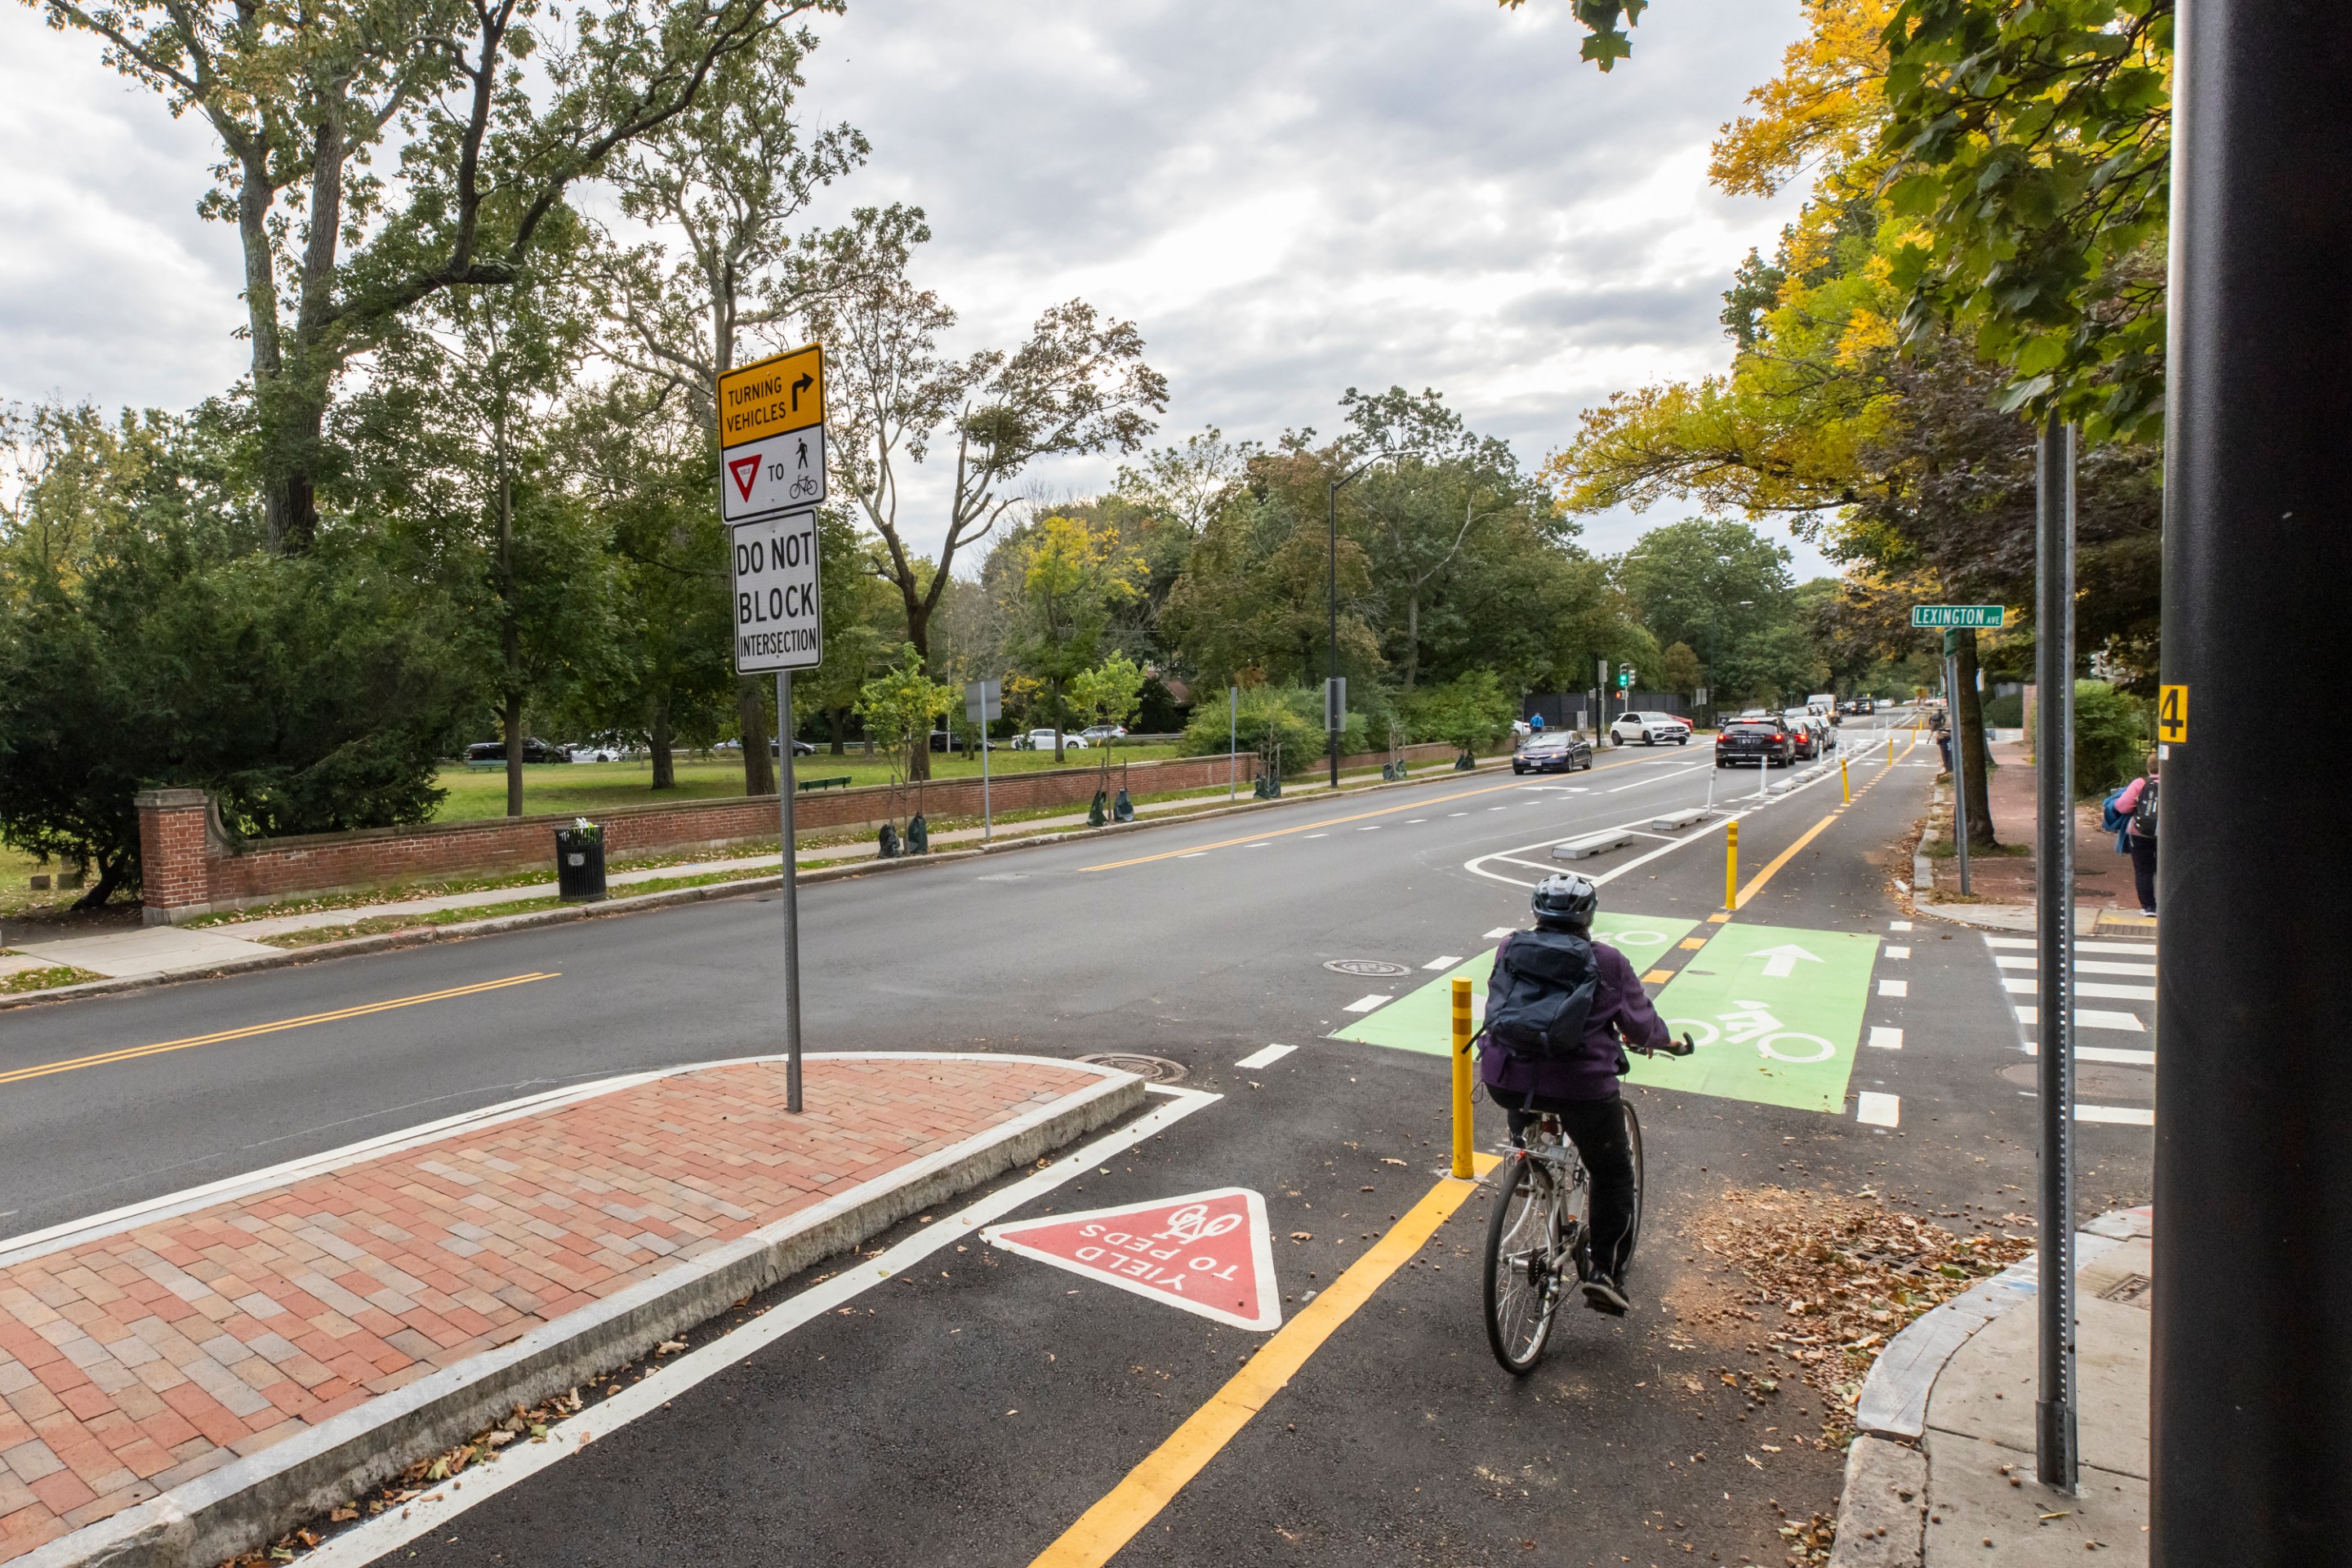 A person wearing black pedals a bike away from the camera on a wide street lined with trees beginning to turn yellow in the autumn. The rider is using a protected bike path that's separated from the adjacent car lanes by barriers including a brick-paved median island in the lower left foreground.